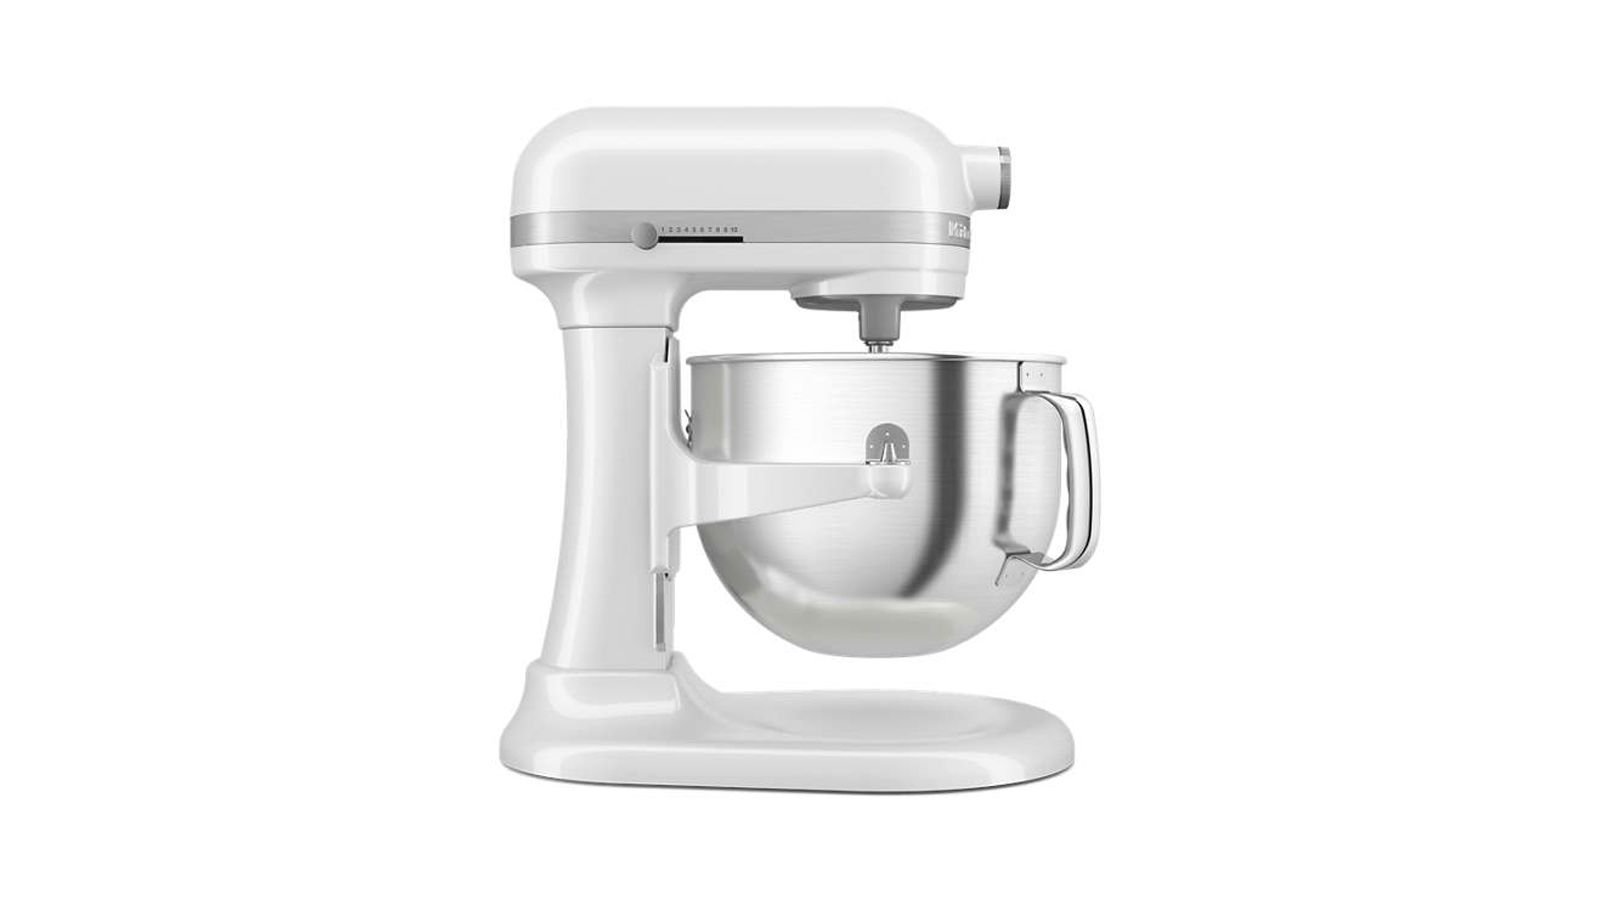 https://media.cnn.com/api/v1/images/stellar/prod/7-quart-bowl-lift-stand-mixer-with-redesigned-premium-touchpoints.jpg?q=h_900,w_1600,x_0,y_0